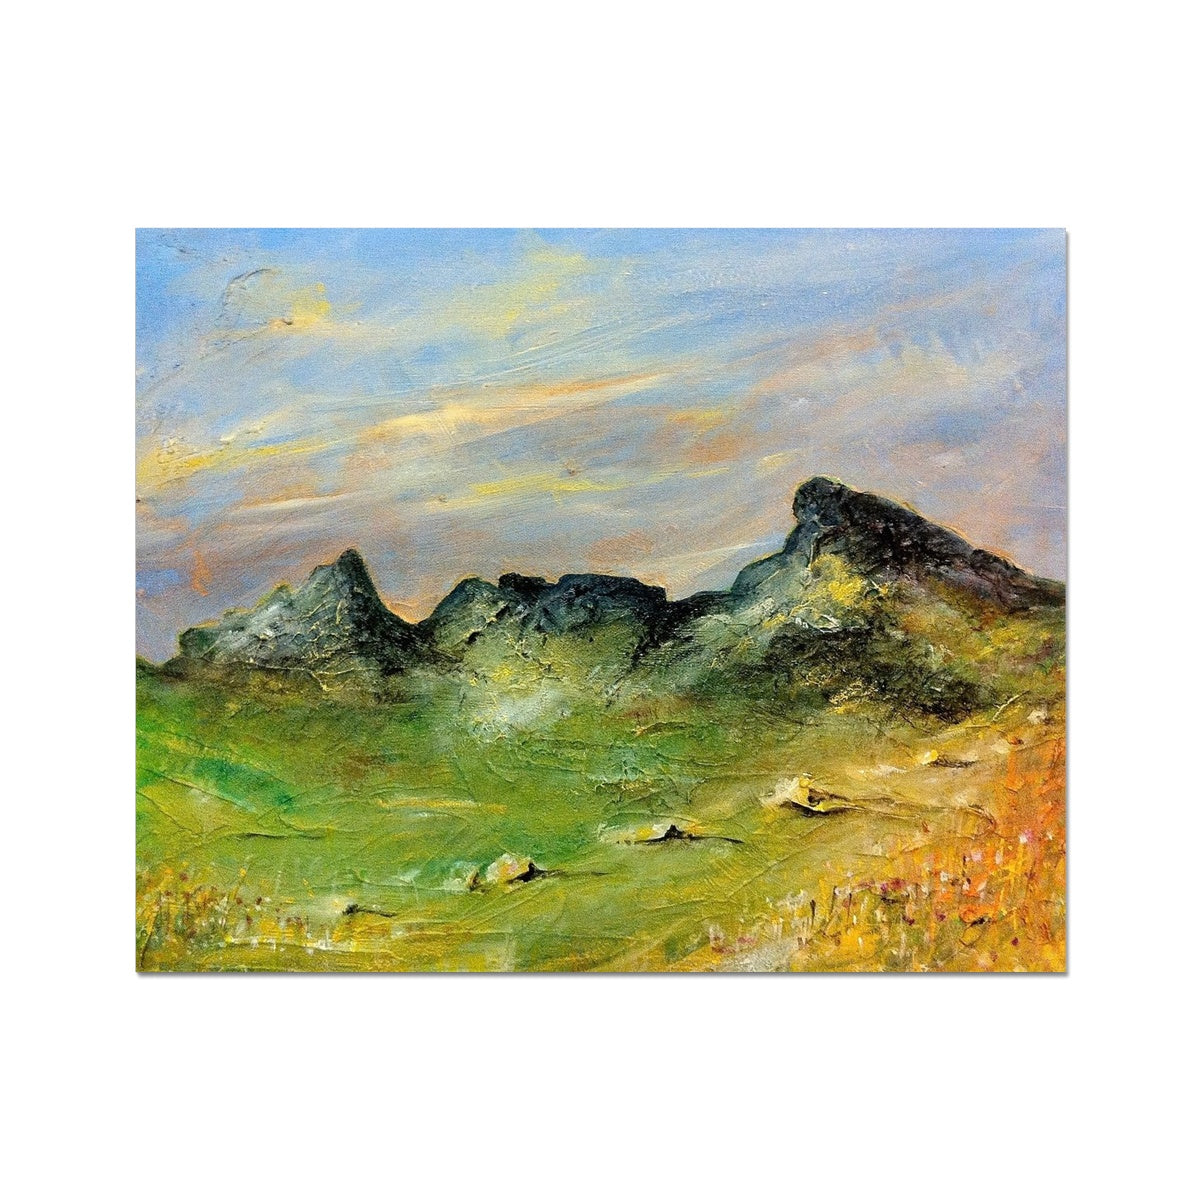 The Cobbler Painting | Artist Proof Collector Prints From Scotland-Artist Proof Collector Prints-Scottish Lochs & Mountains Art Gallery-20"x16"-Paintings, Prints, Homeware, Art Gifts From Scotland By Scottish Artist Kevin Hunter